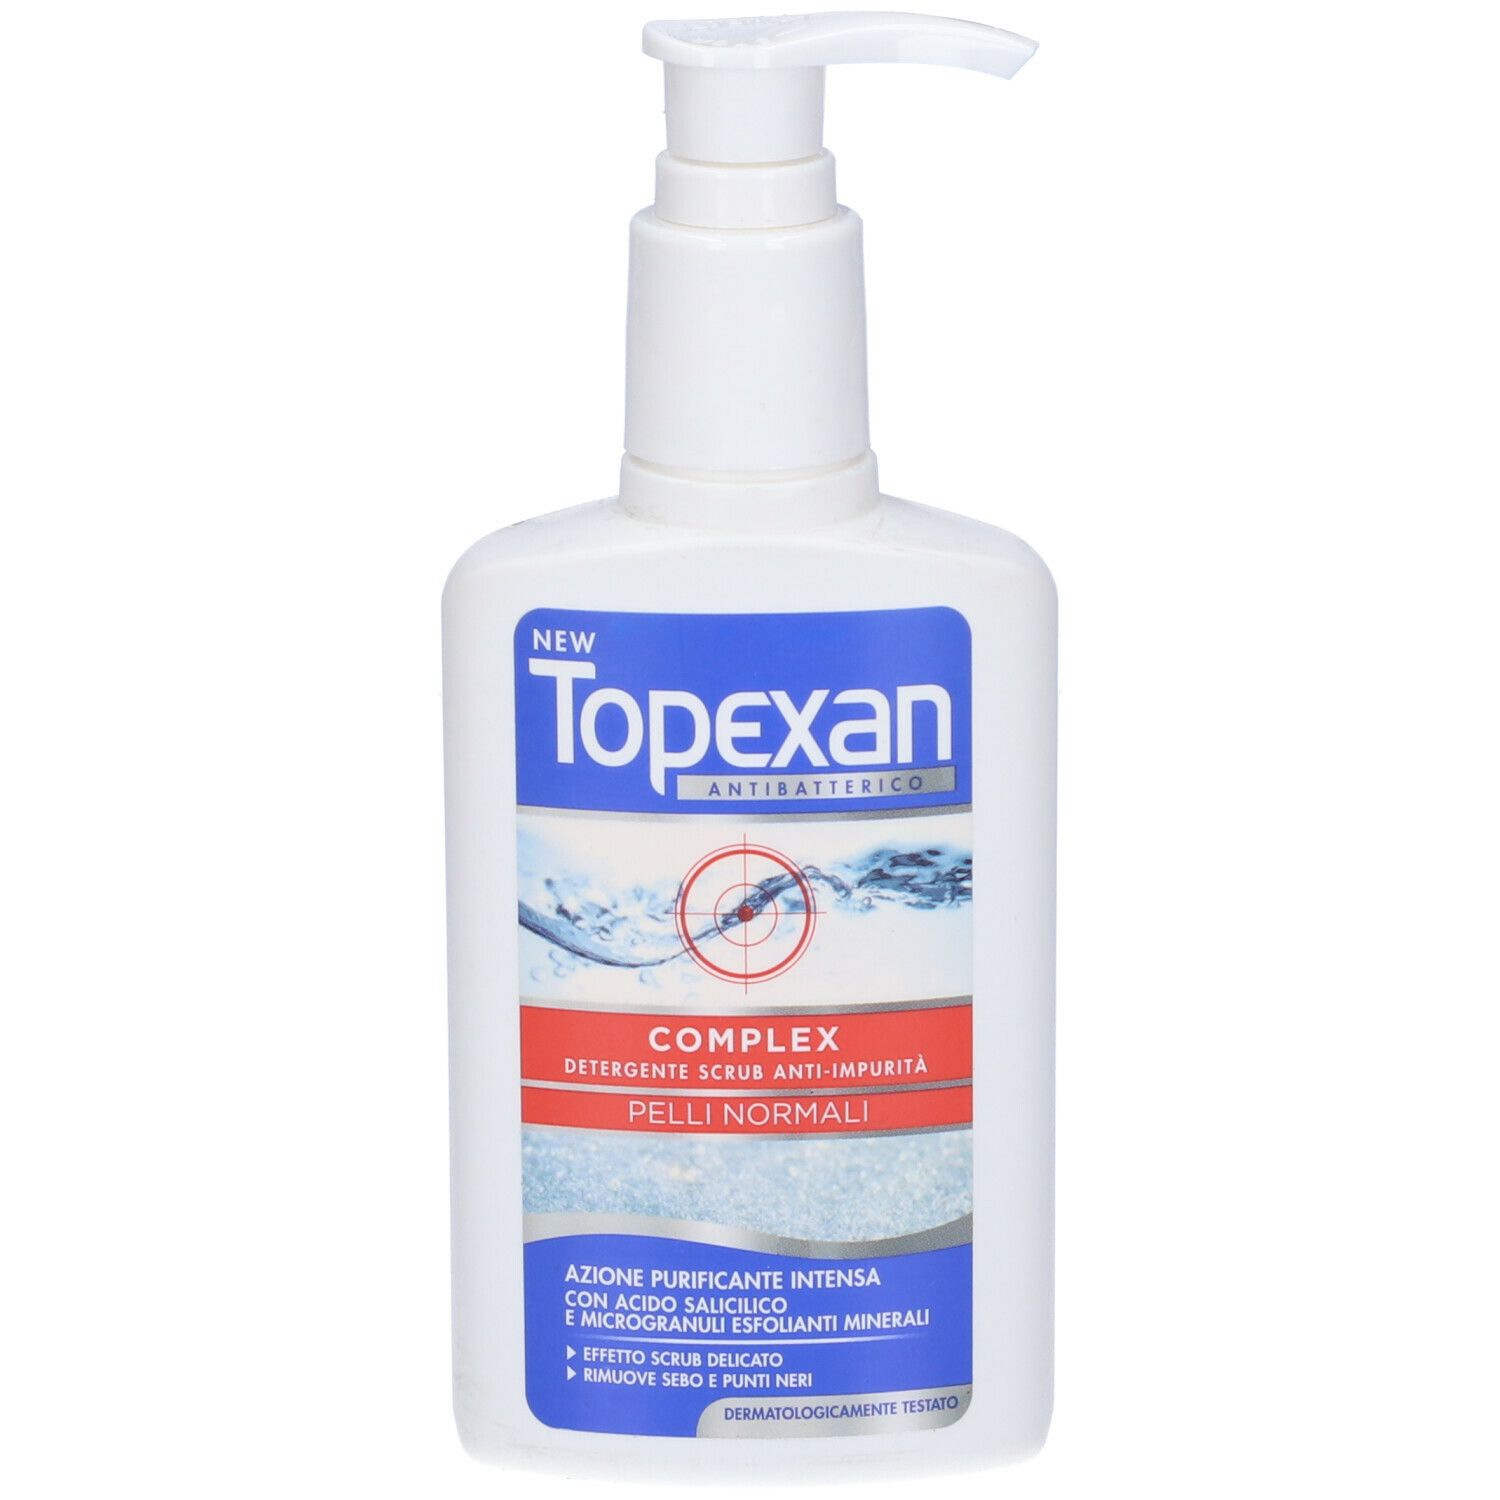 New Topexan Complex P Norm 150